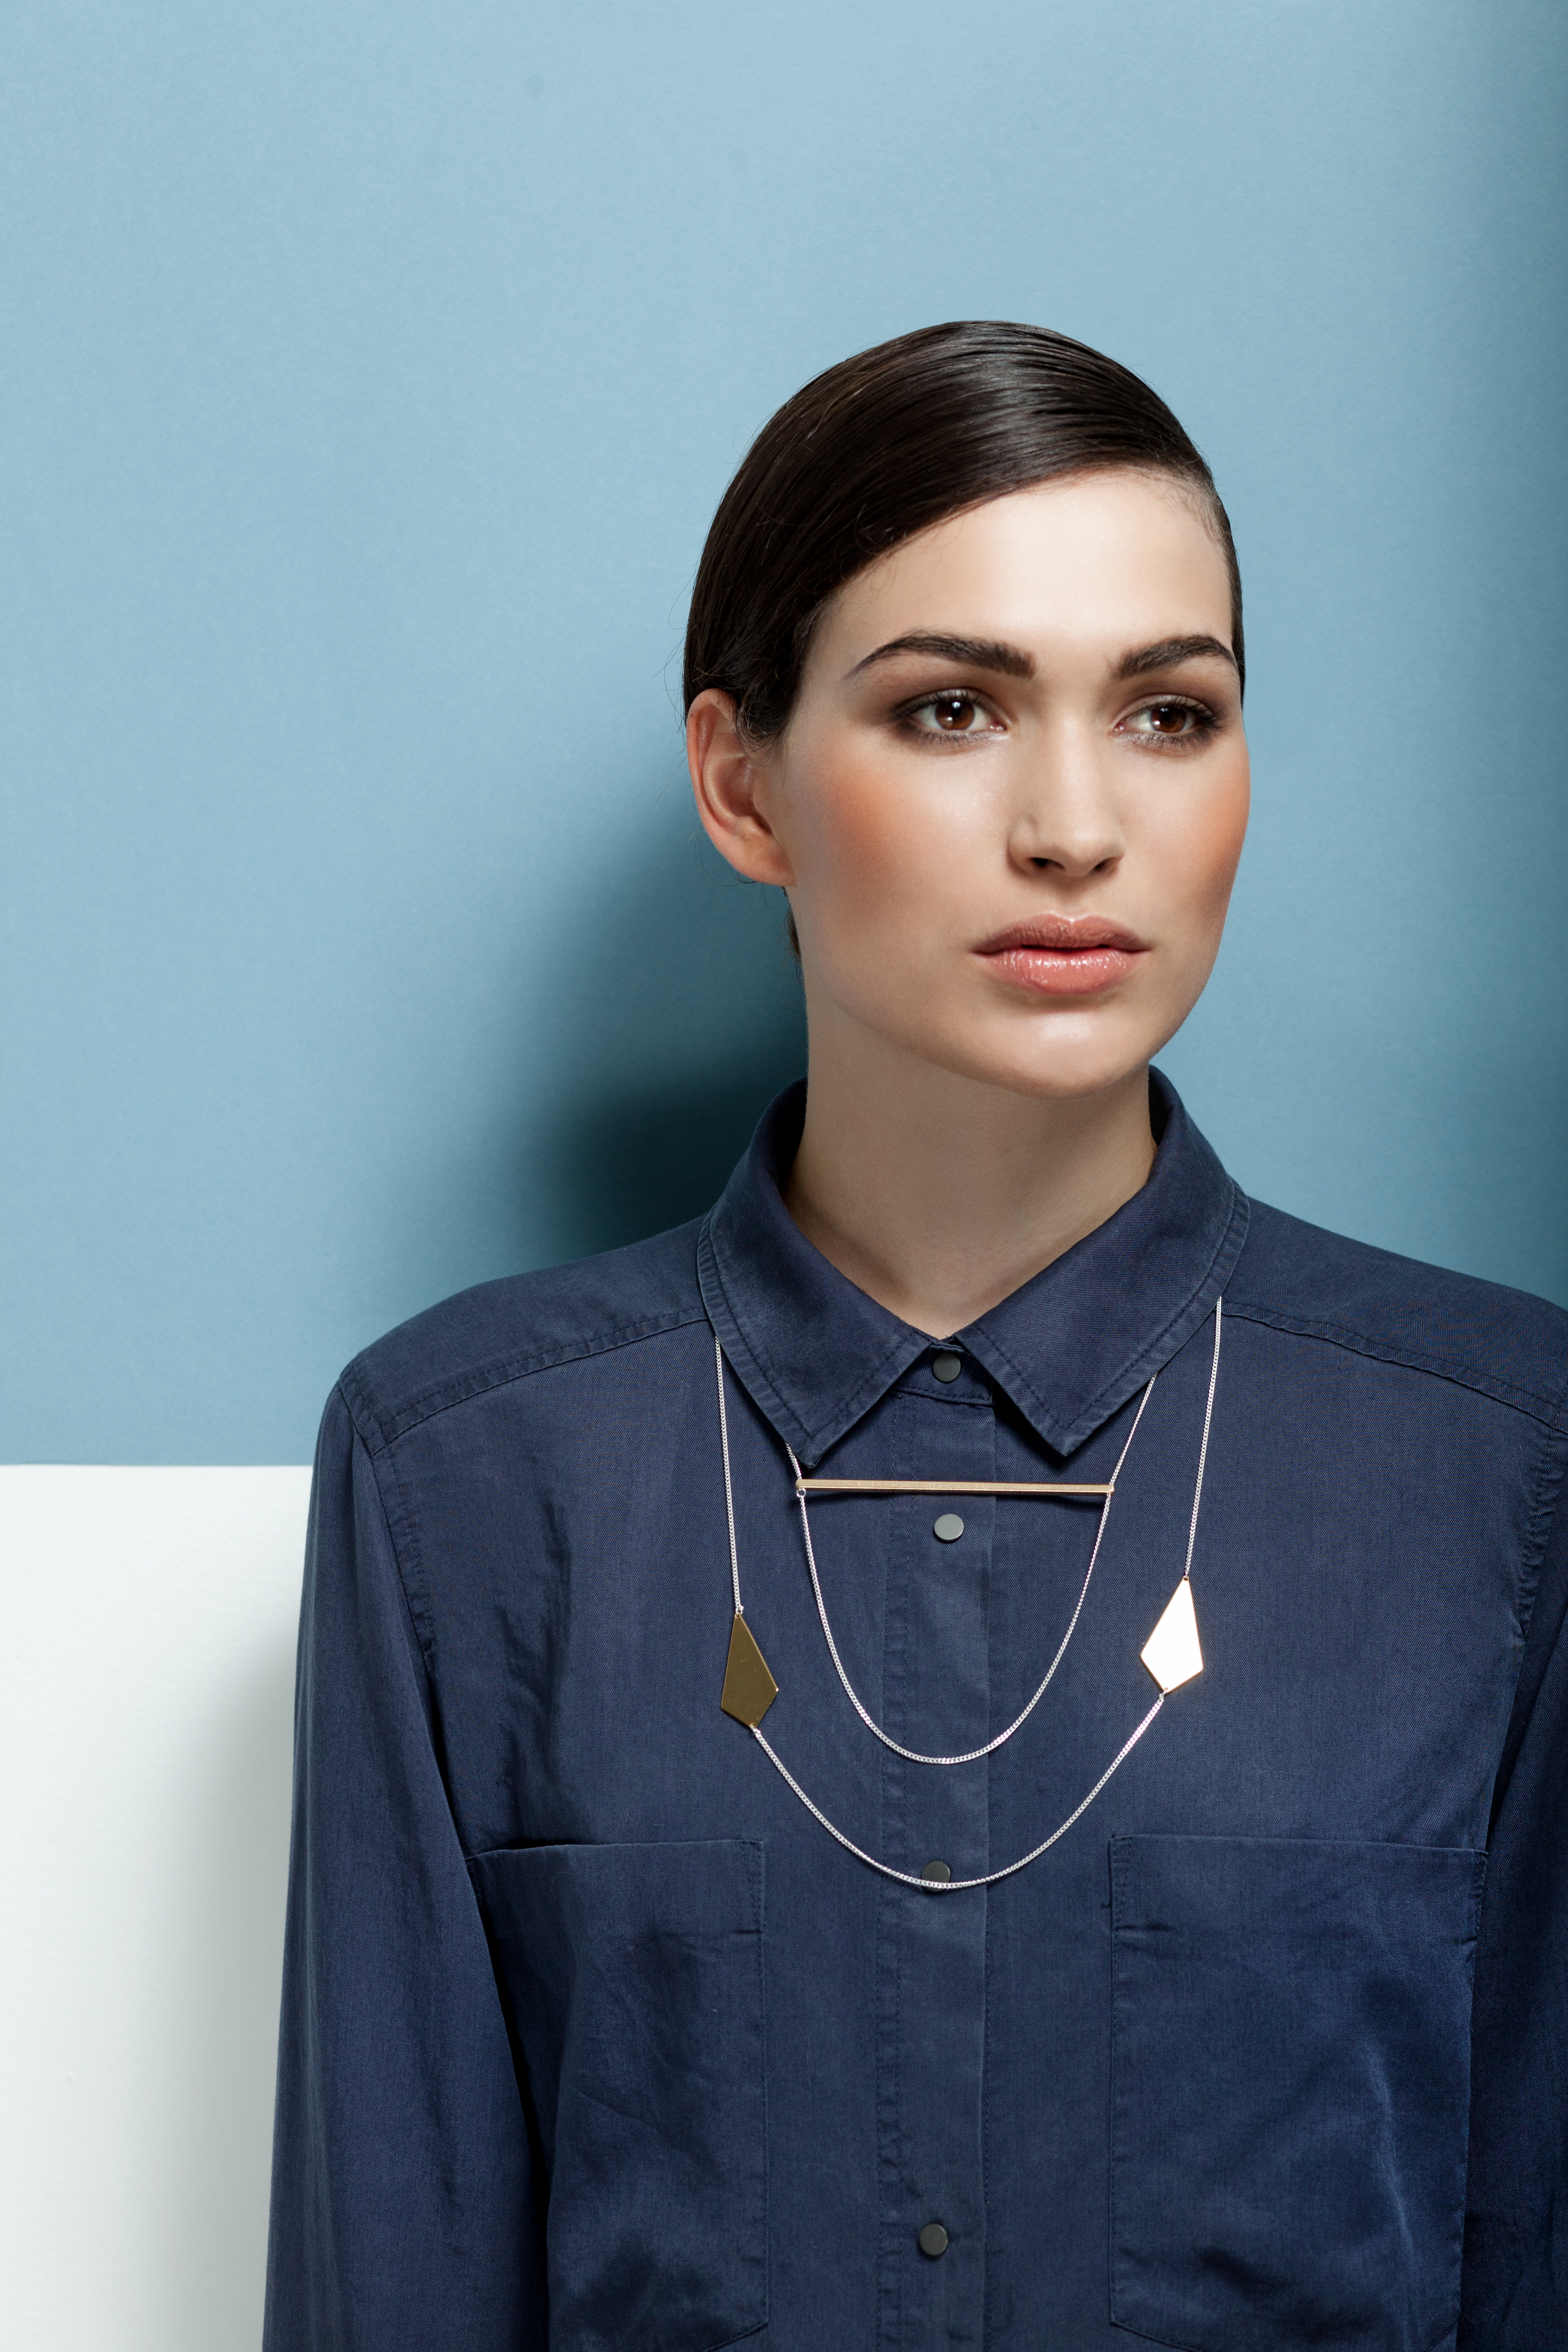 Win: Sphere Horizontal necklace by The Boyscouts